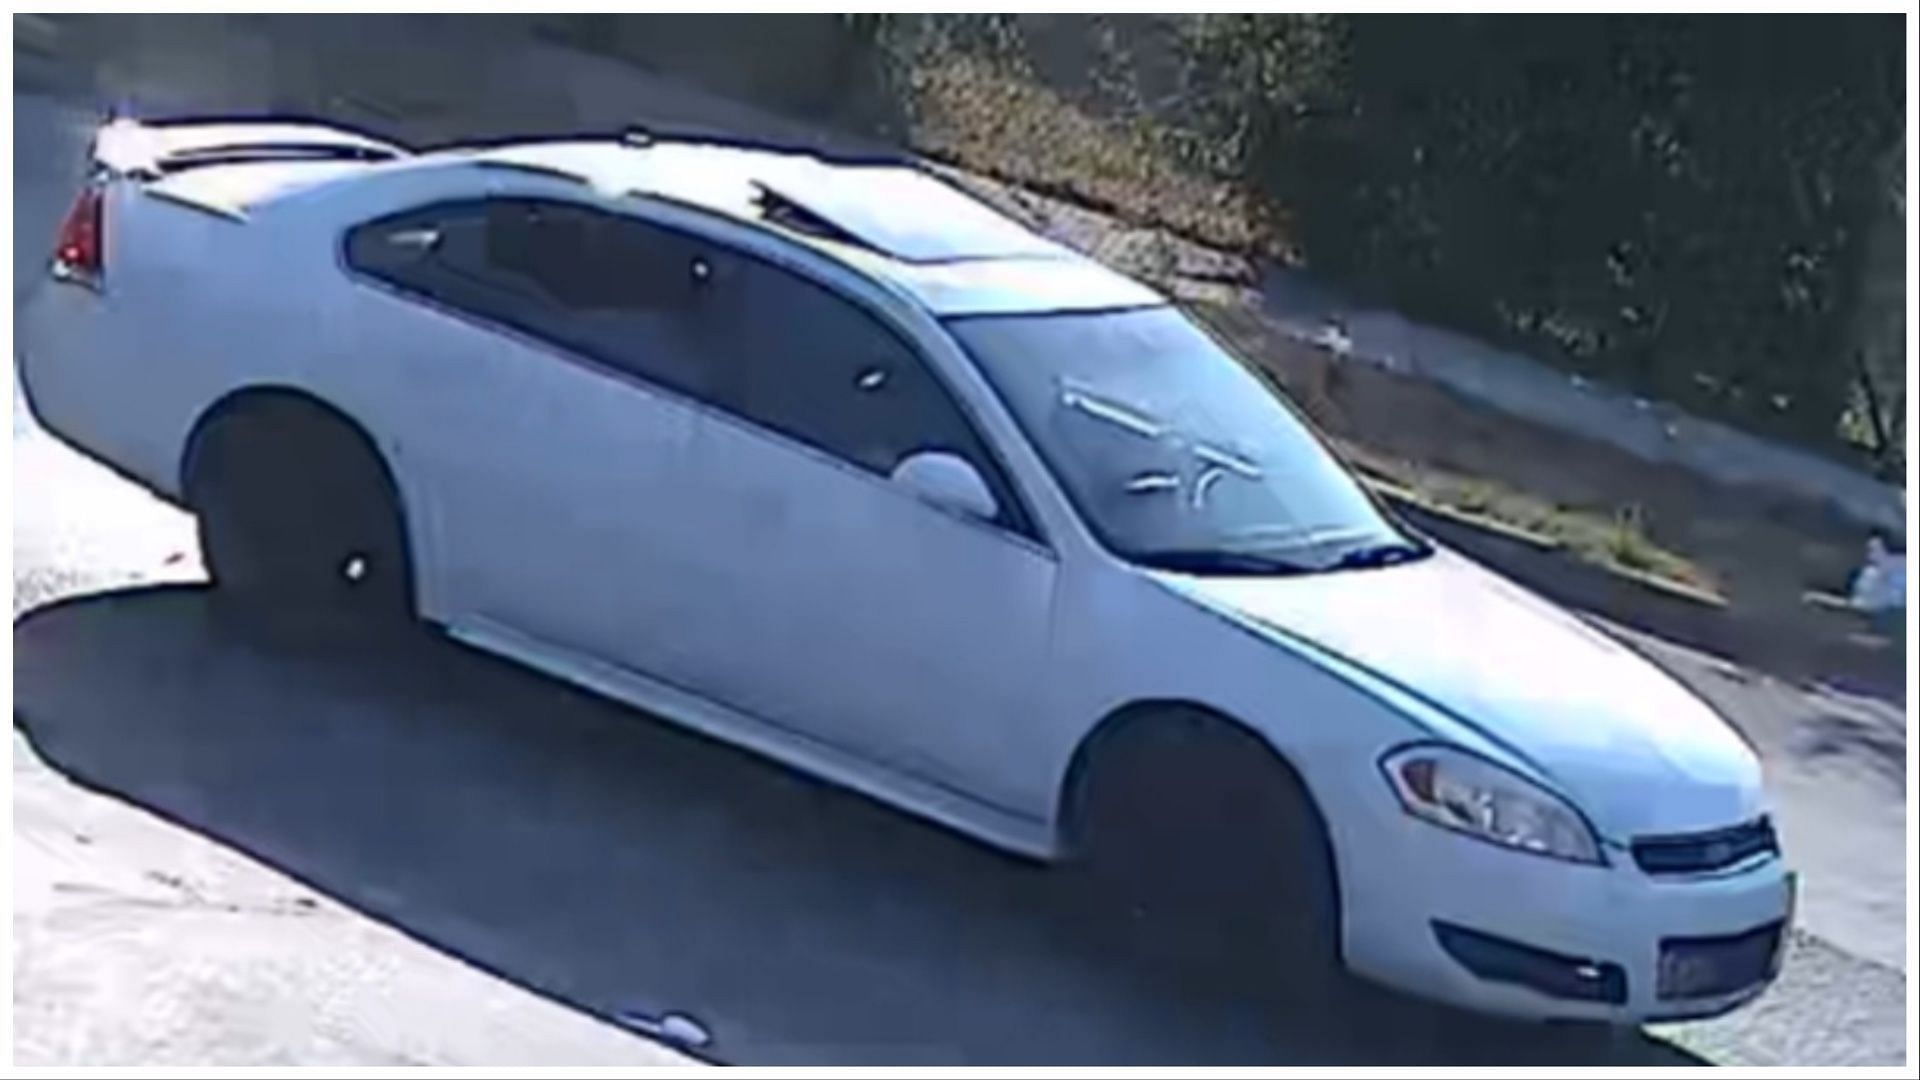 The robbers left in a white vehicle after one of them shot David Ruback, (Image via Dallas Police Dept/Twitter) 